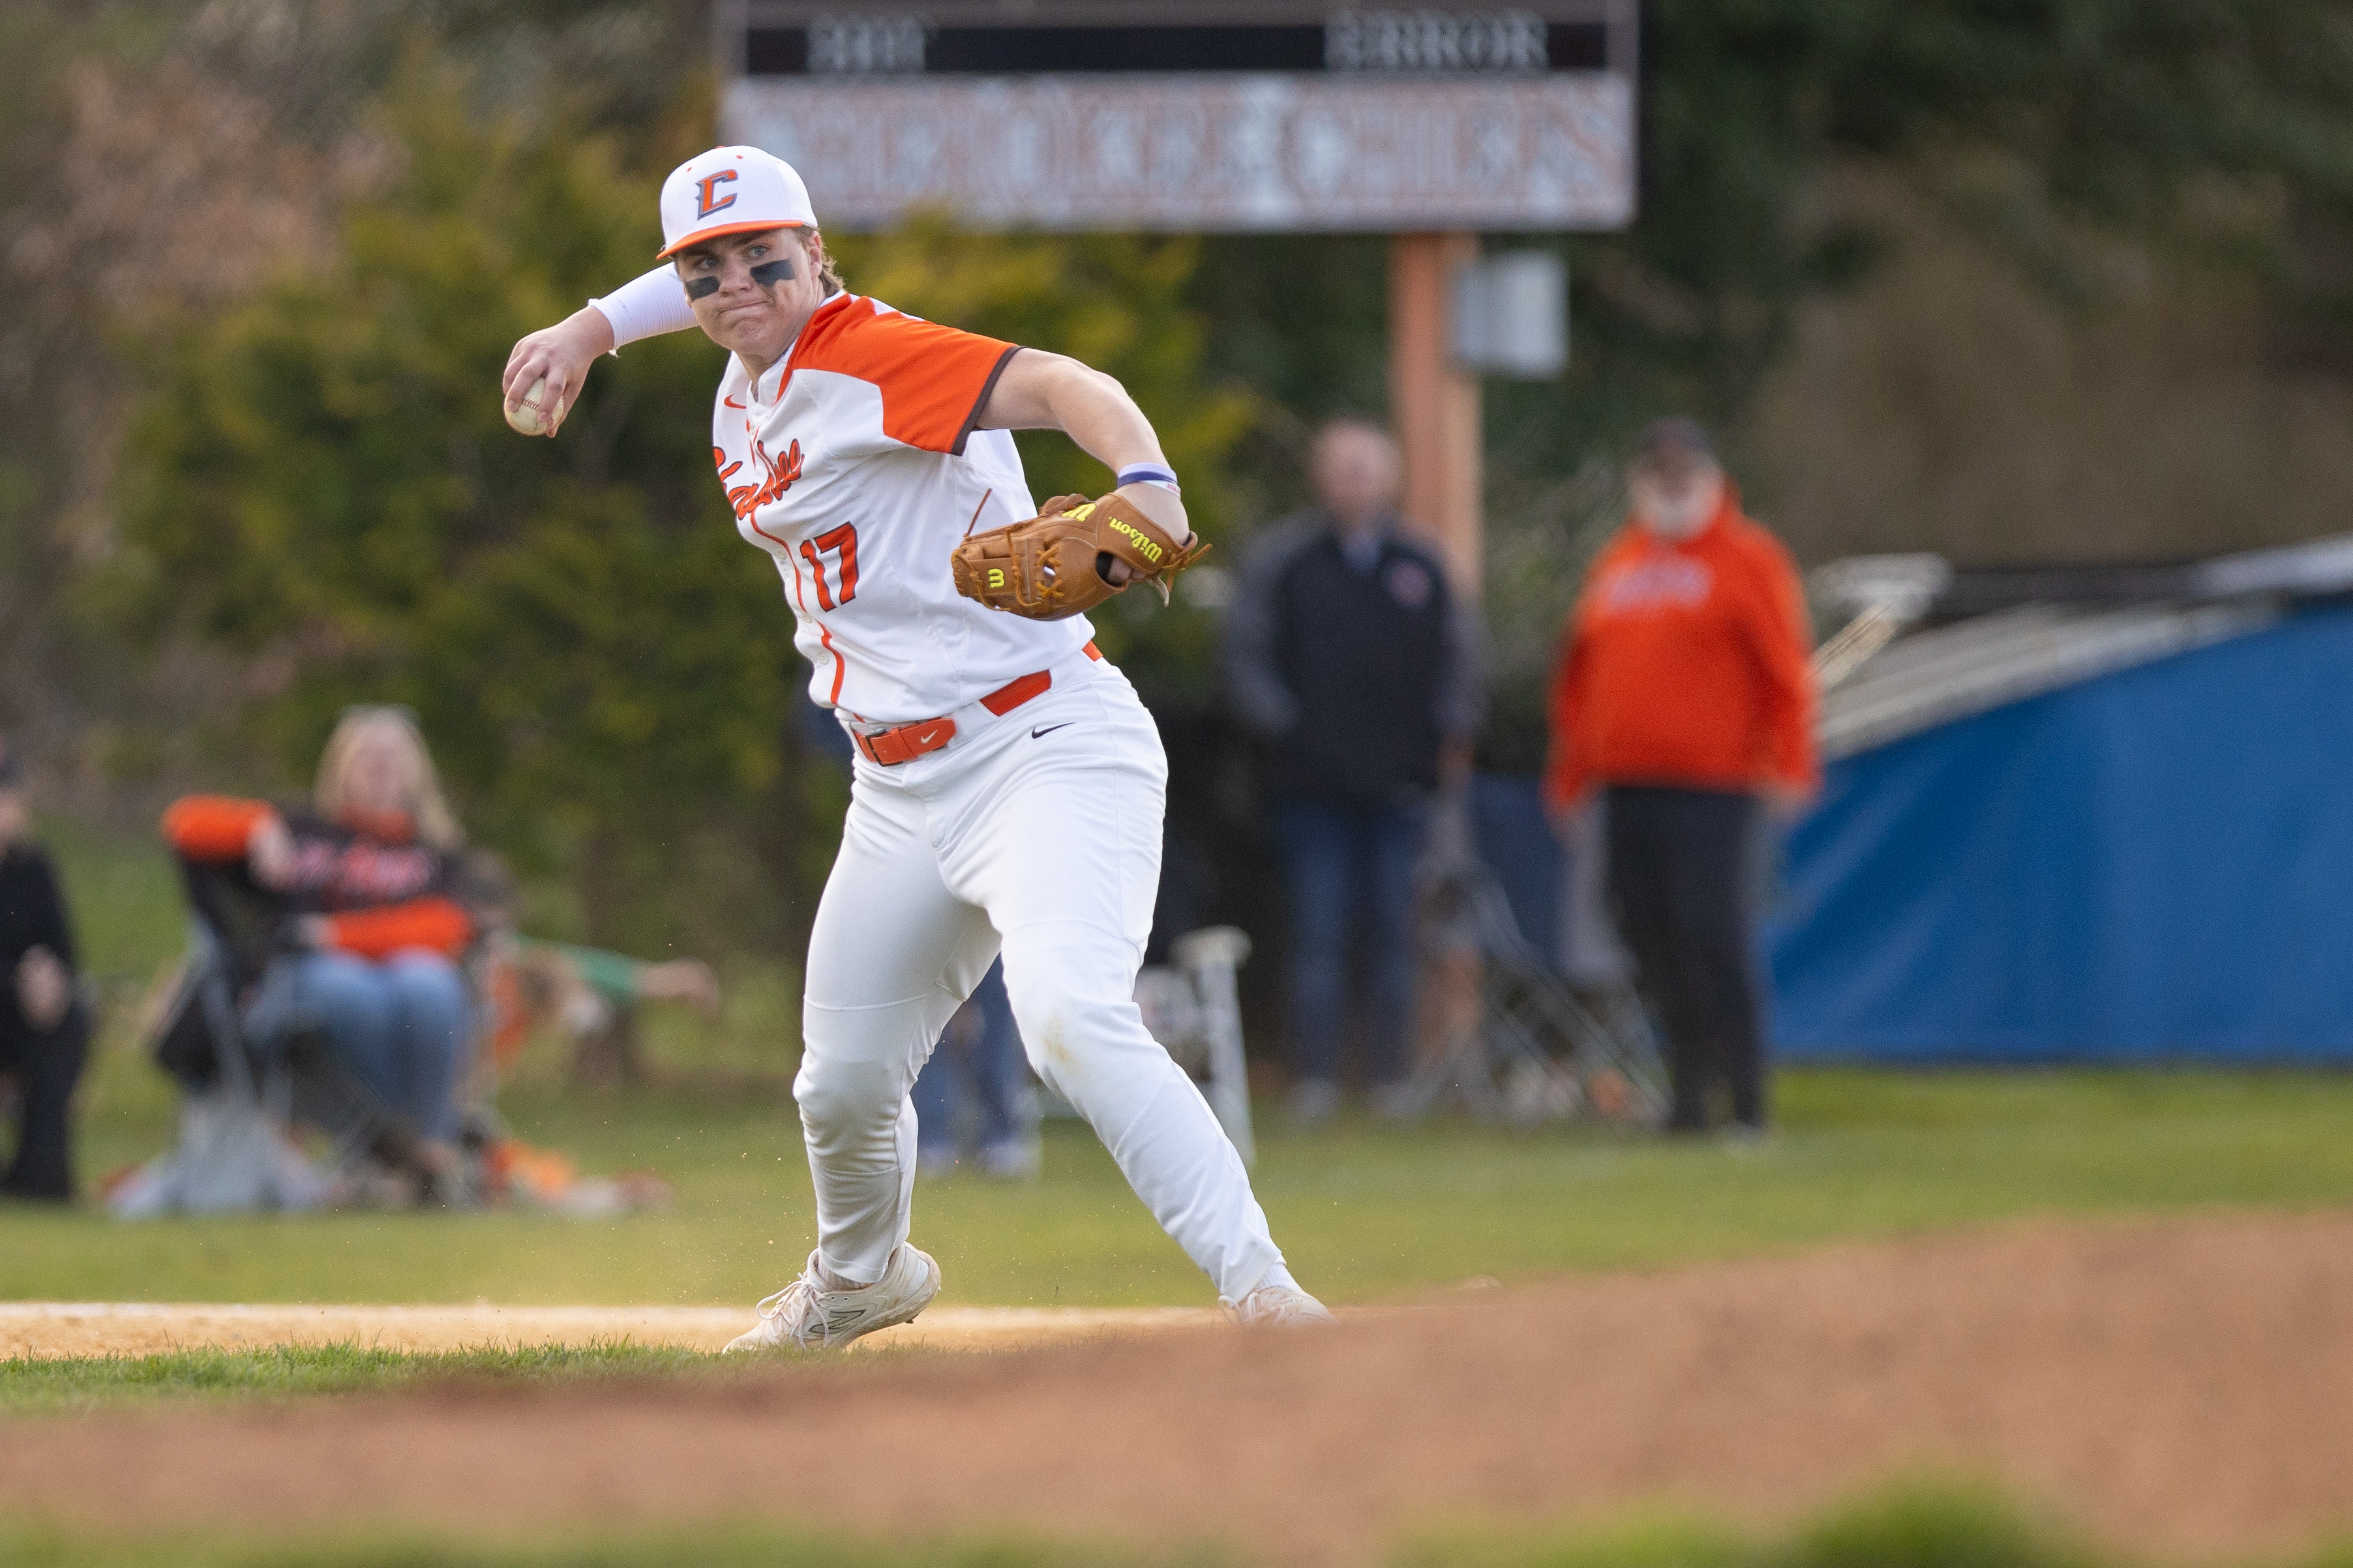 Brett Chiesa (17) of Cherokee, throws to first in Marlton, NJ on Monday, April 3, 2023.